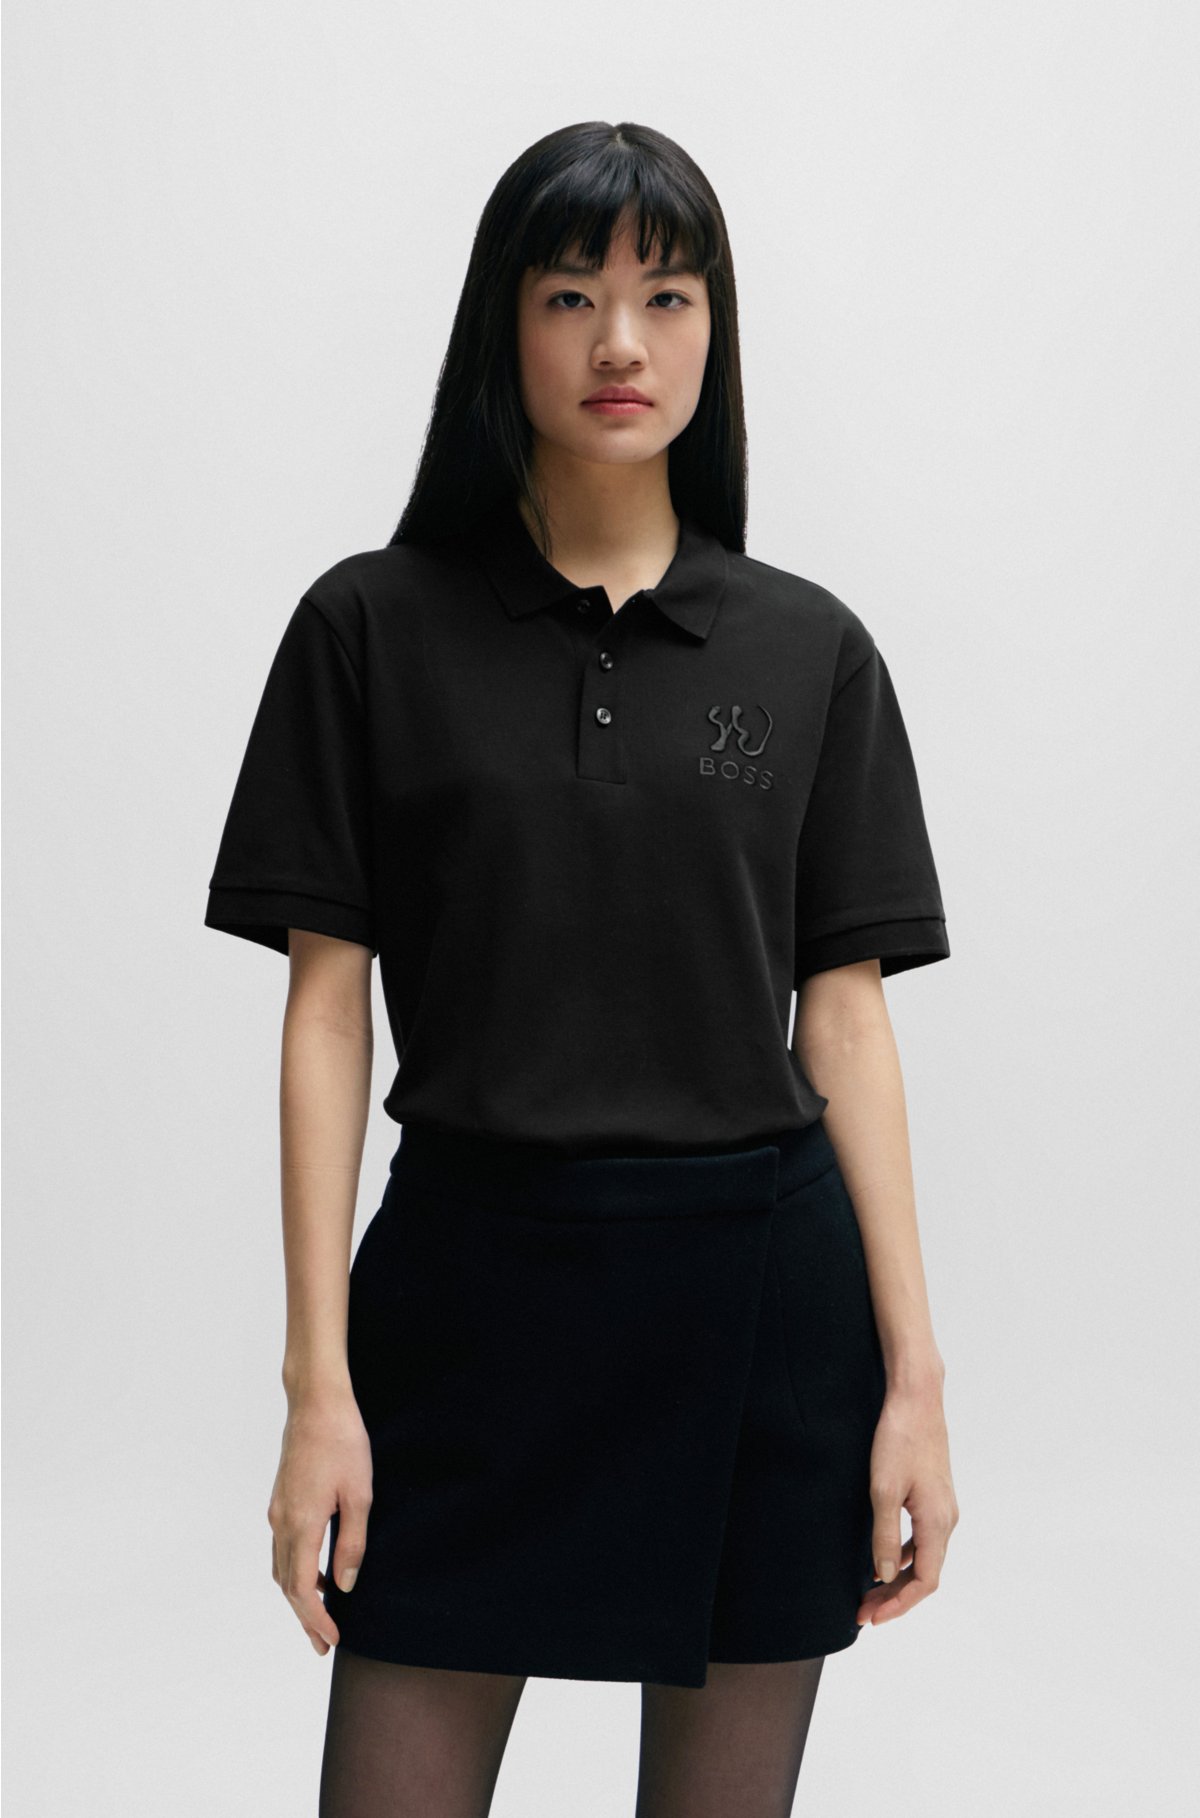 Mercerized-cotton polo shirt with special artwork, Black